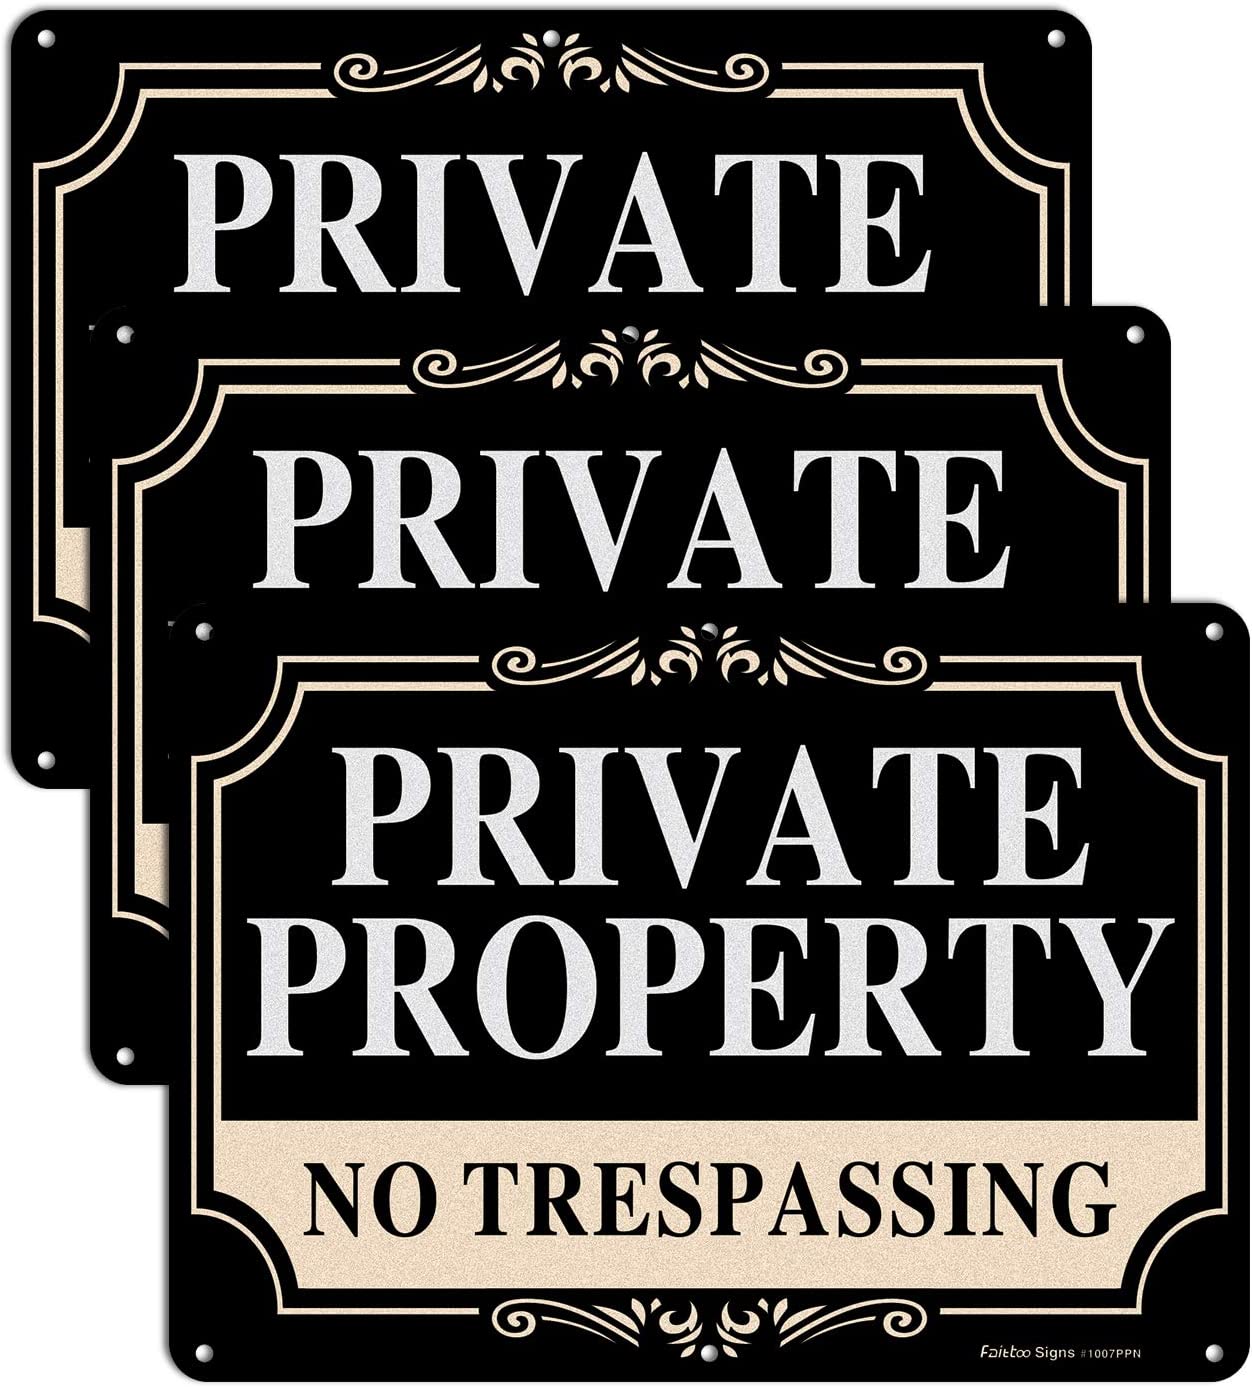 No Trespassing Signs Private Property,14x10 Inch Rust Free Aluminum Metal Sign,Reflective,Fade Resistant,UV Protected,Weatherproof Up to 7 Years Indoor/Outdoor Use